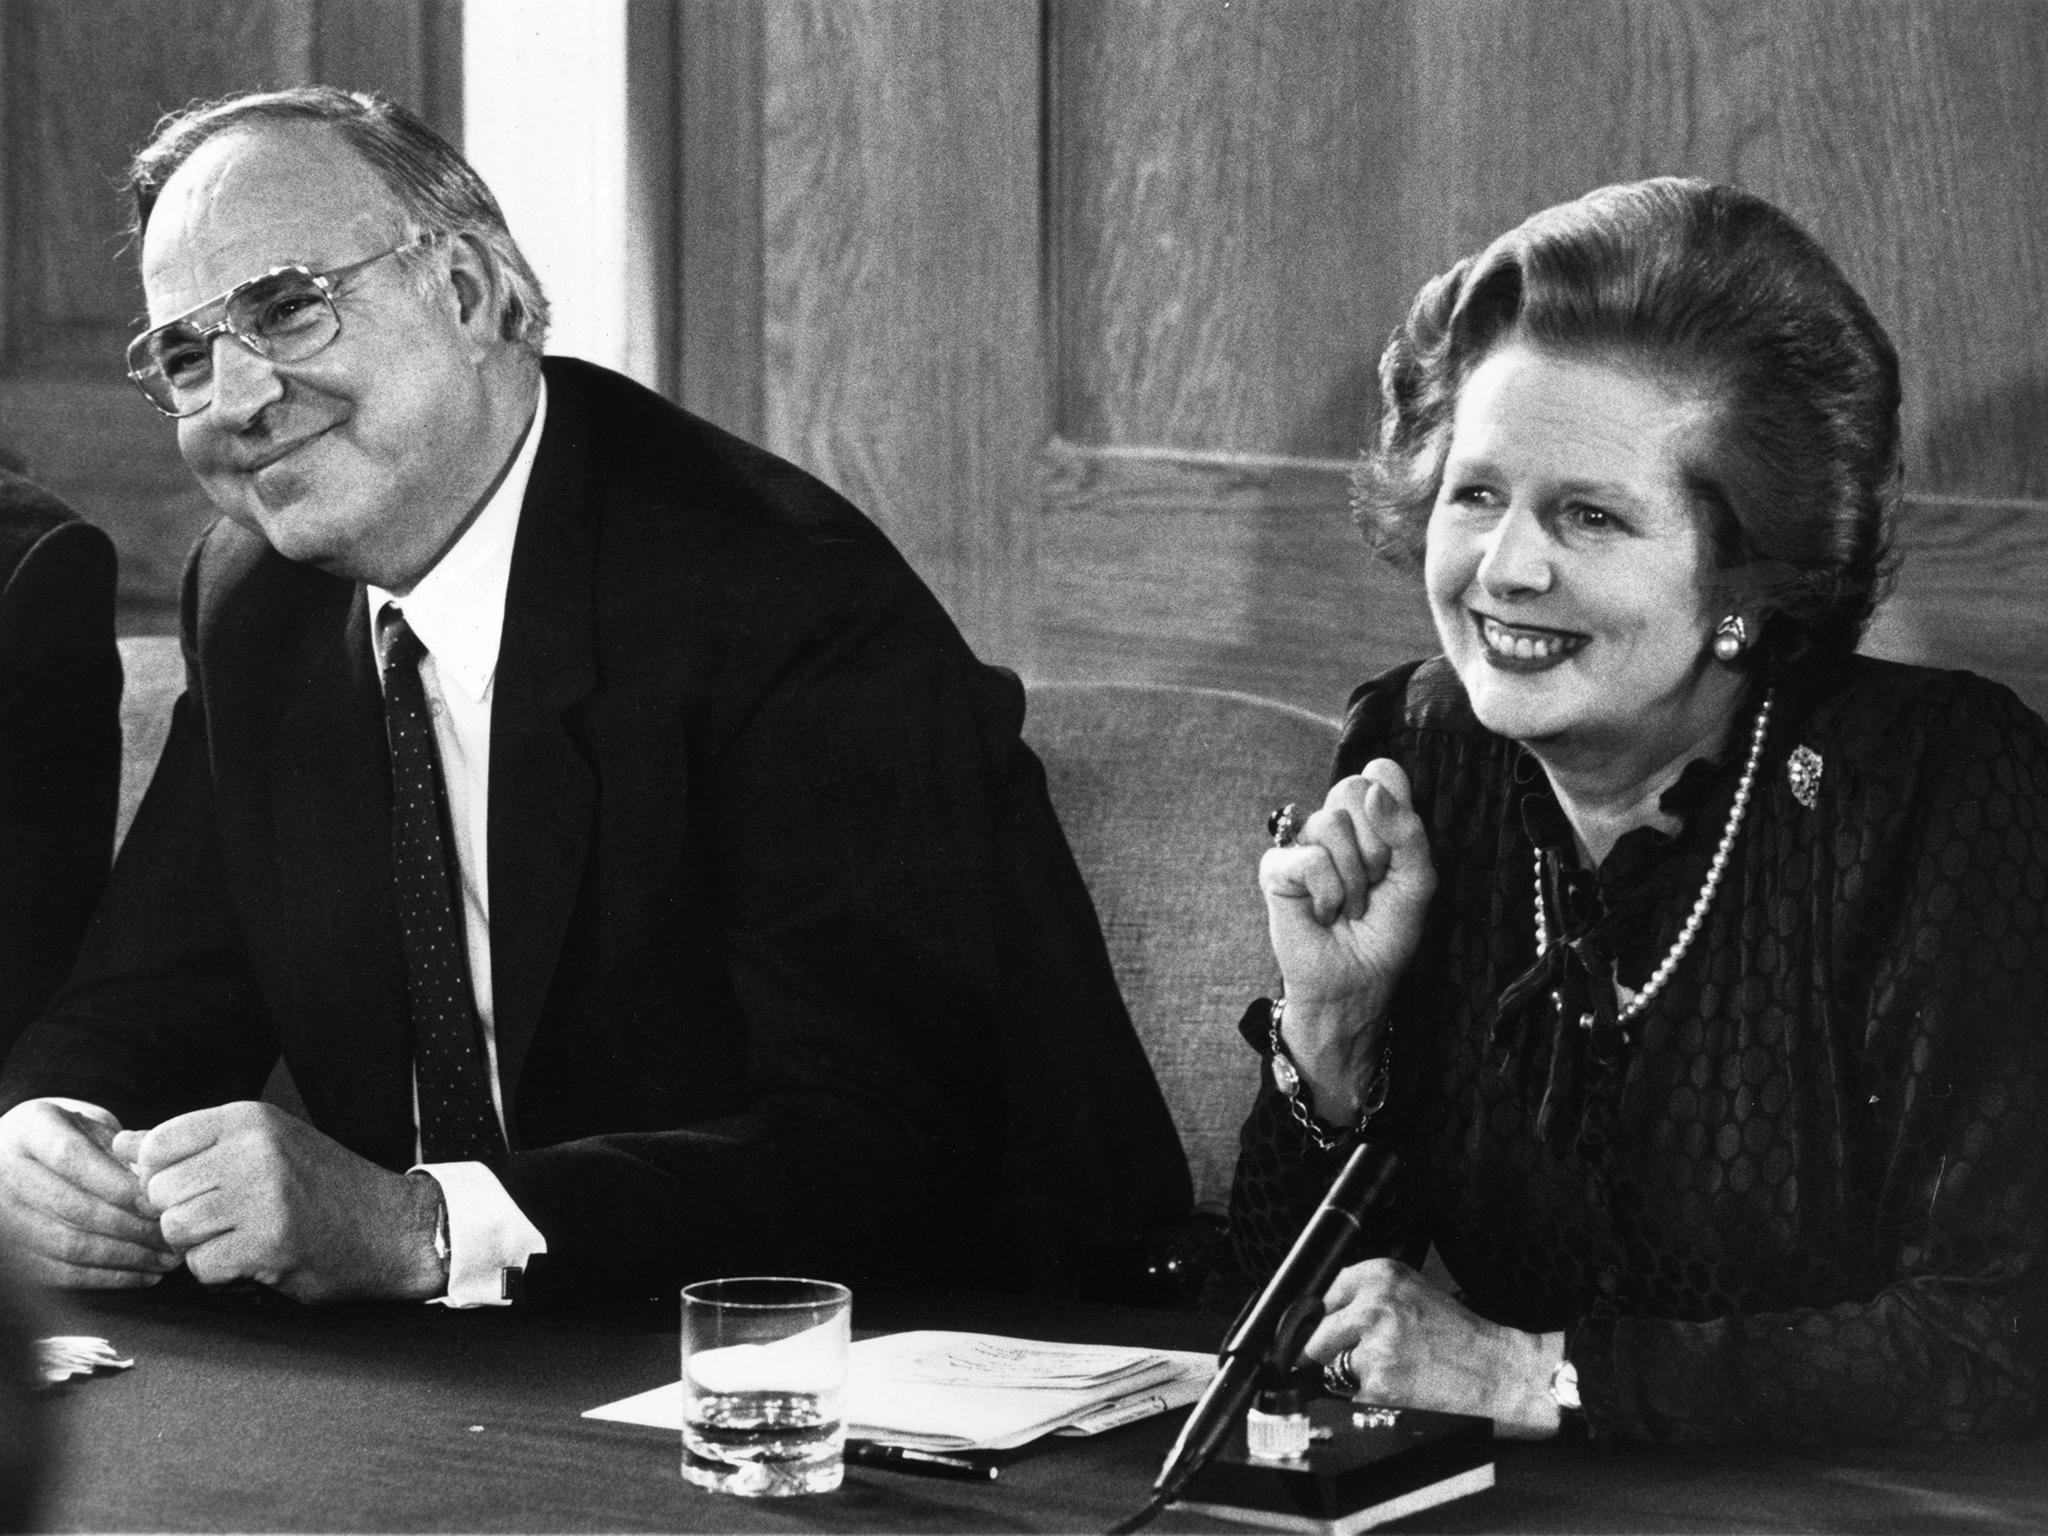 The German Chancellor Helmut Kohl, pictured with Margaret Thatcher, believed that a single European currency was God’s gift to mankind